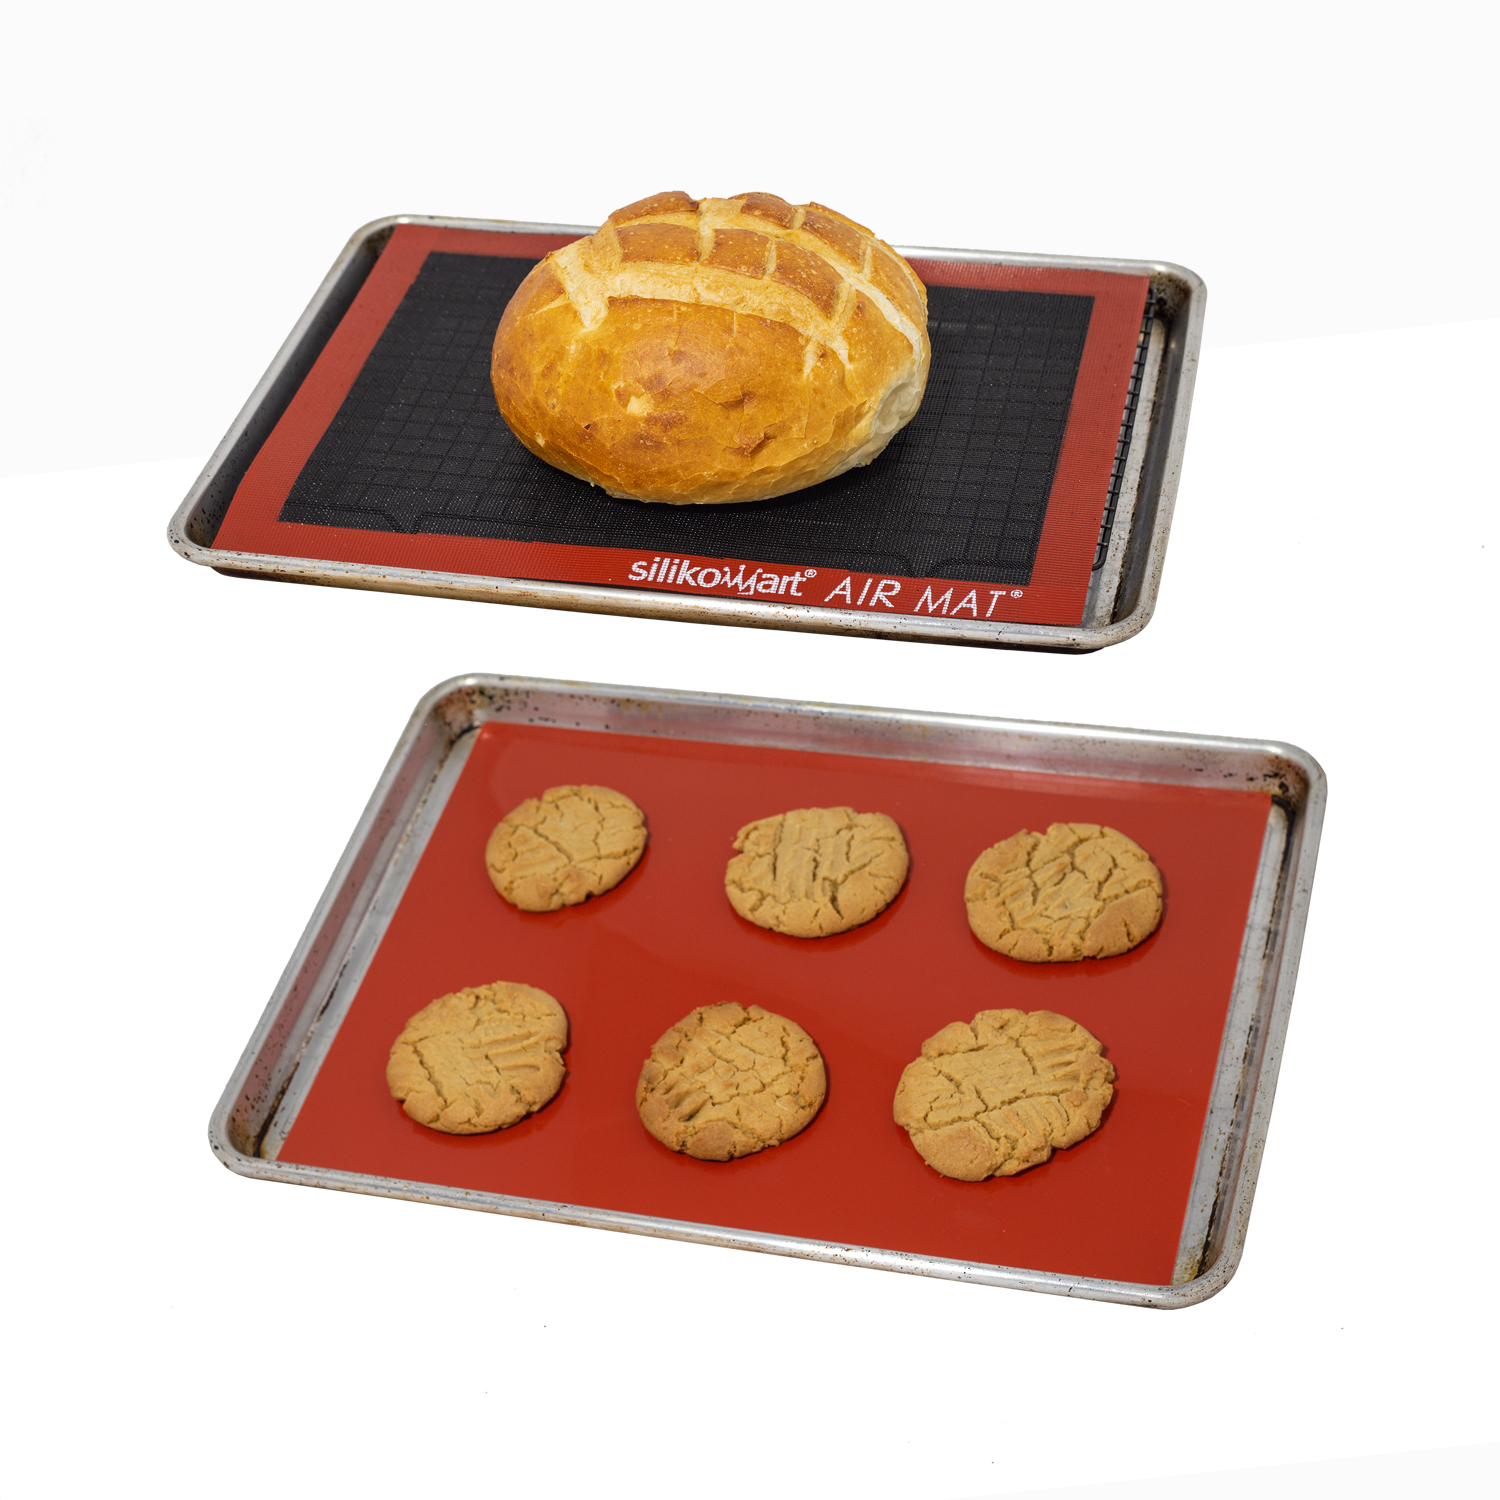 Home Silicone Baking Mat Non-Stick Pastry Cookie Baking Sheet Oven Liner